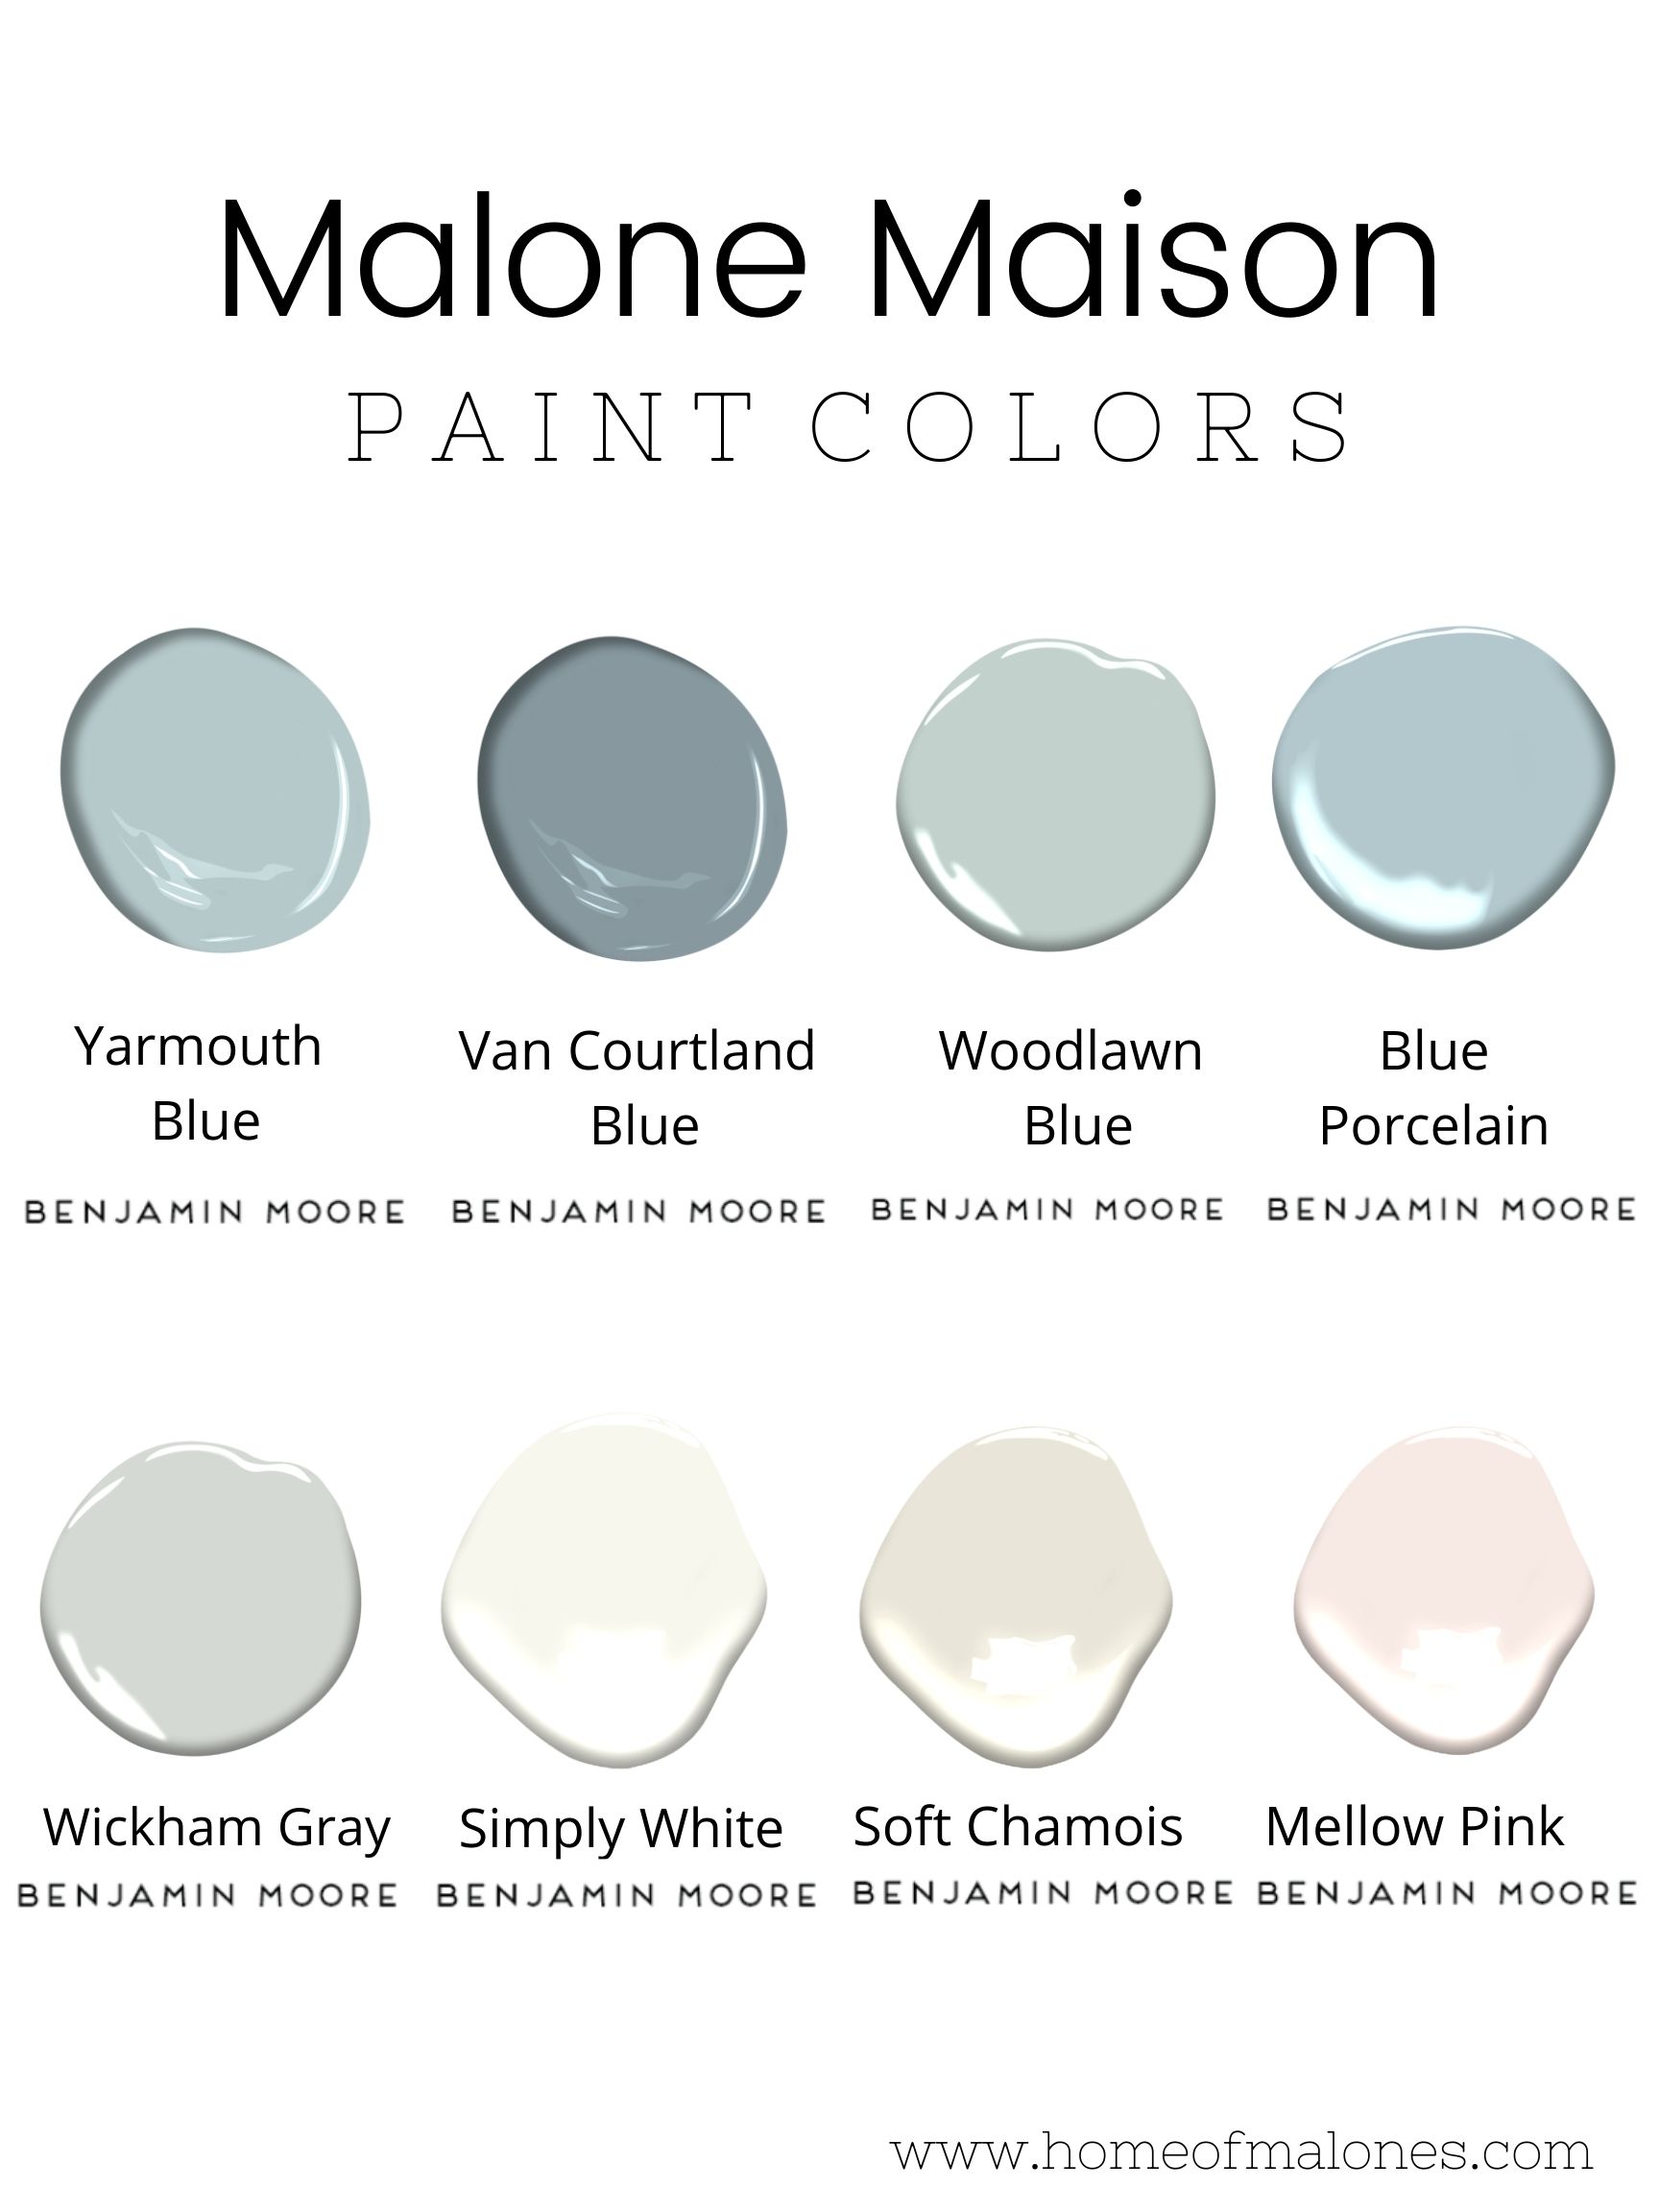 Malone Maison Our Paint Colors Home Of Malones